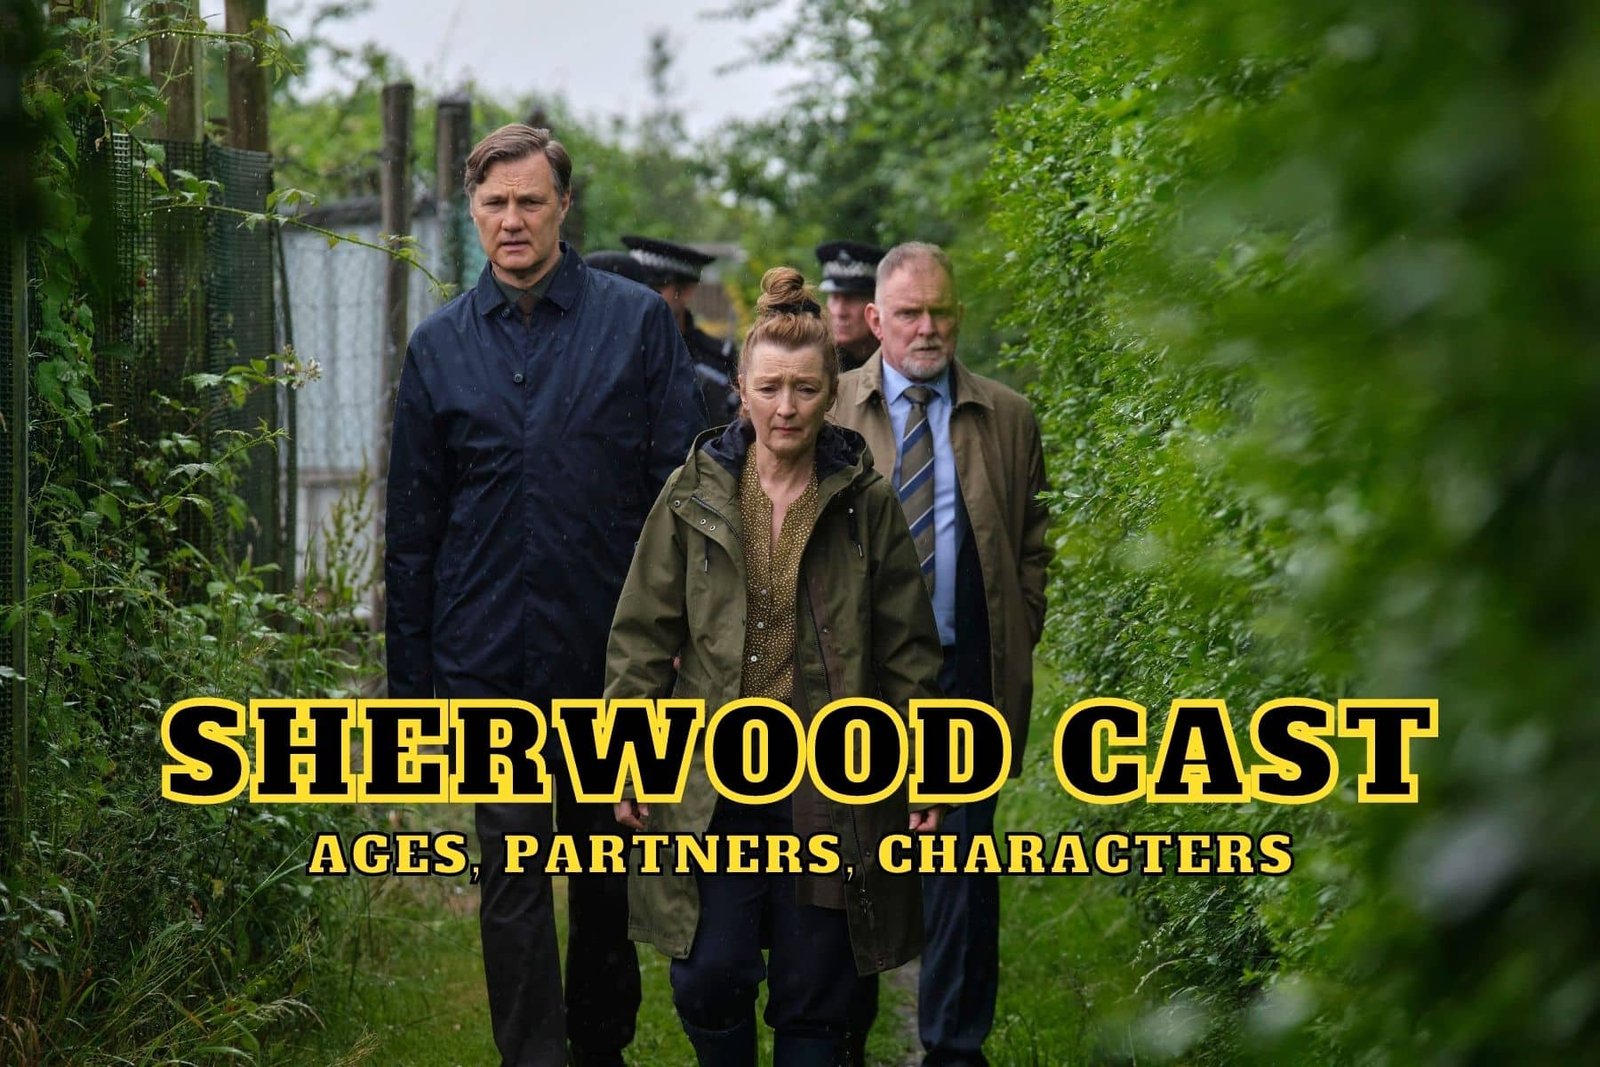 Sherwood Cast - Ages, Partners, Characters